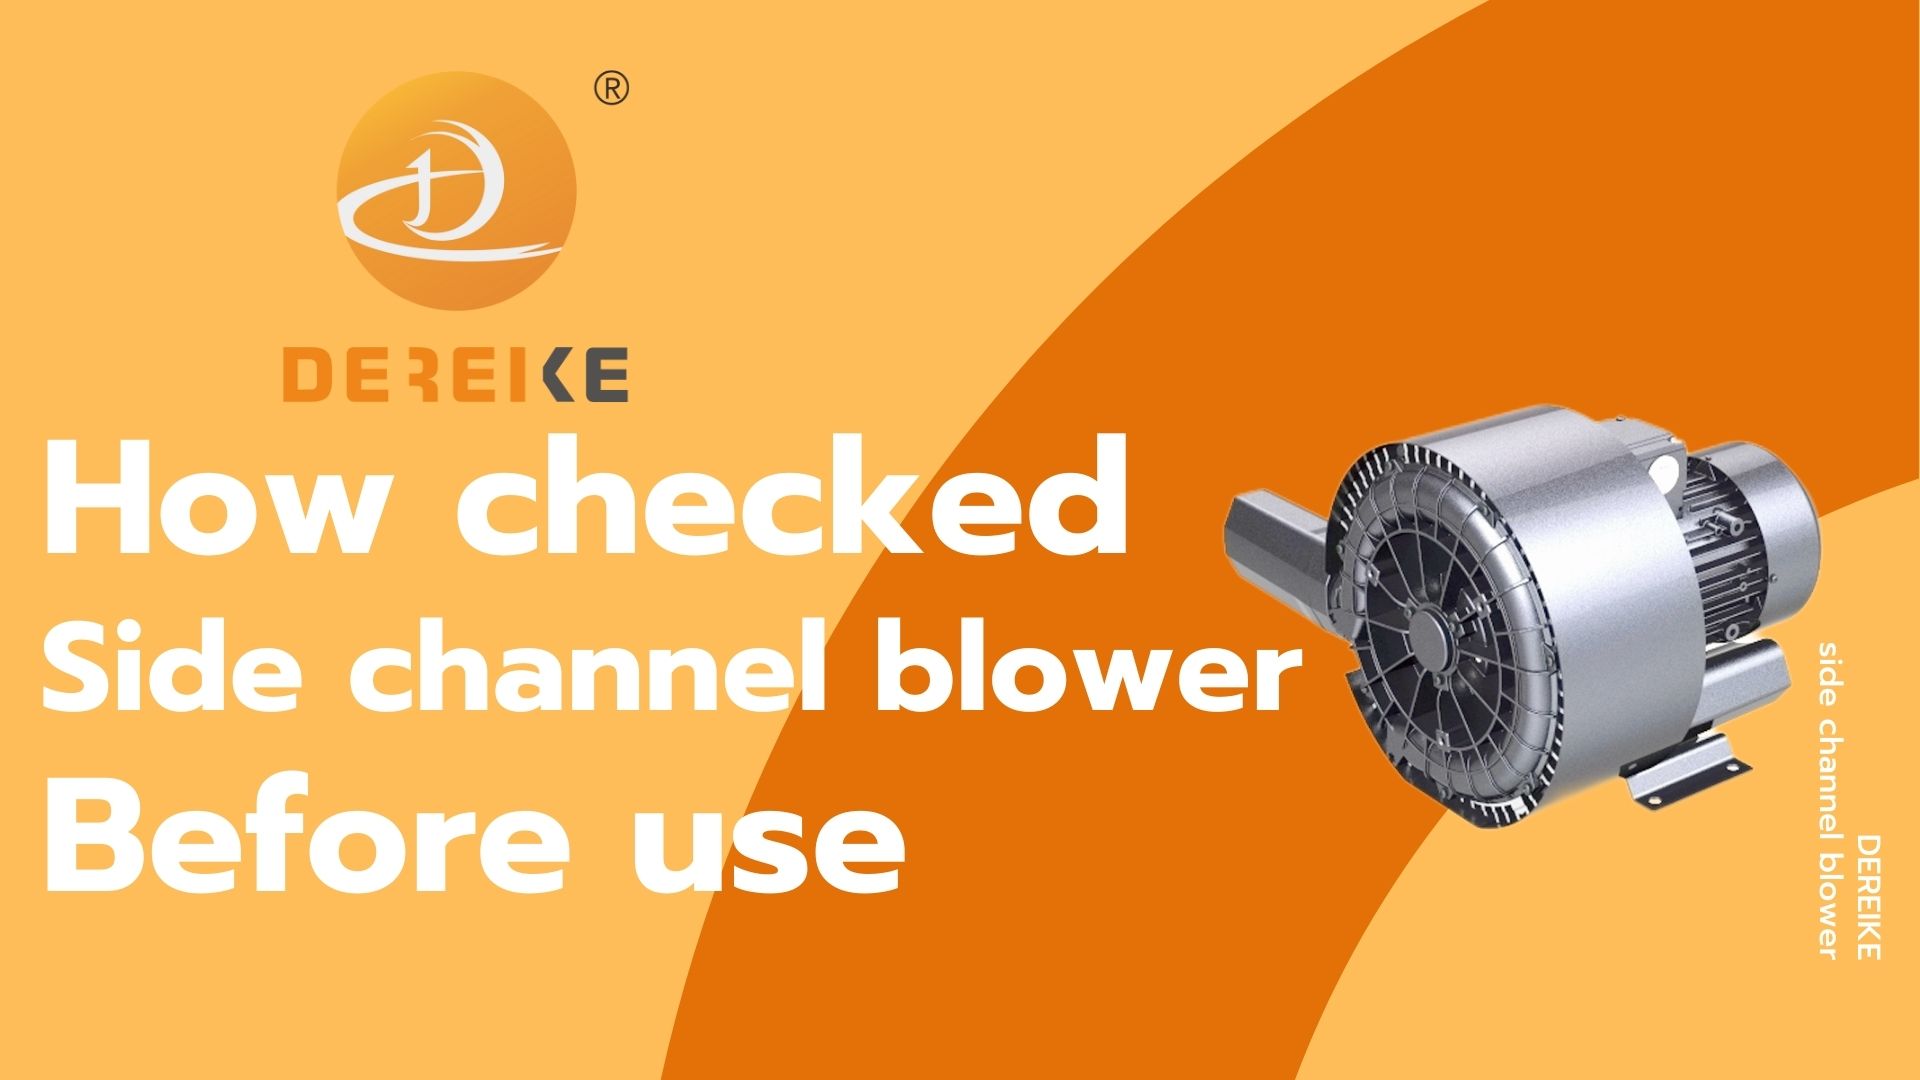 How should the side channel blowers be checked before use